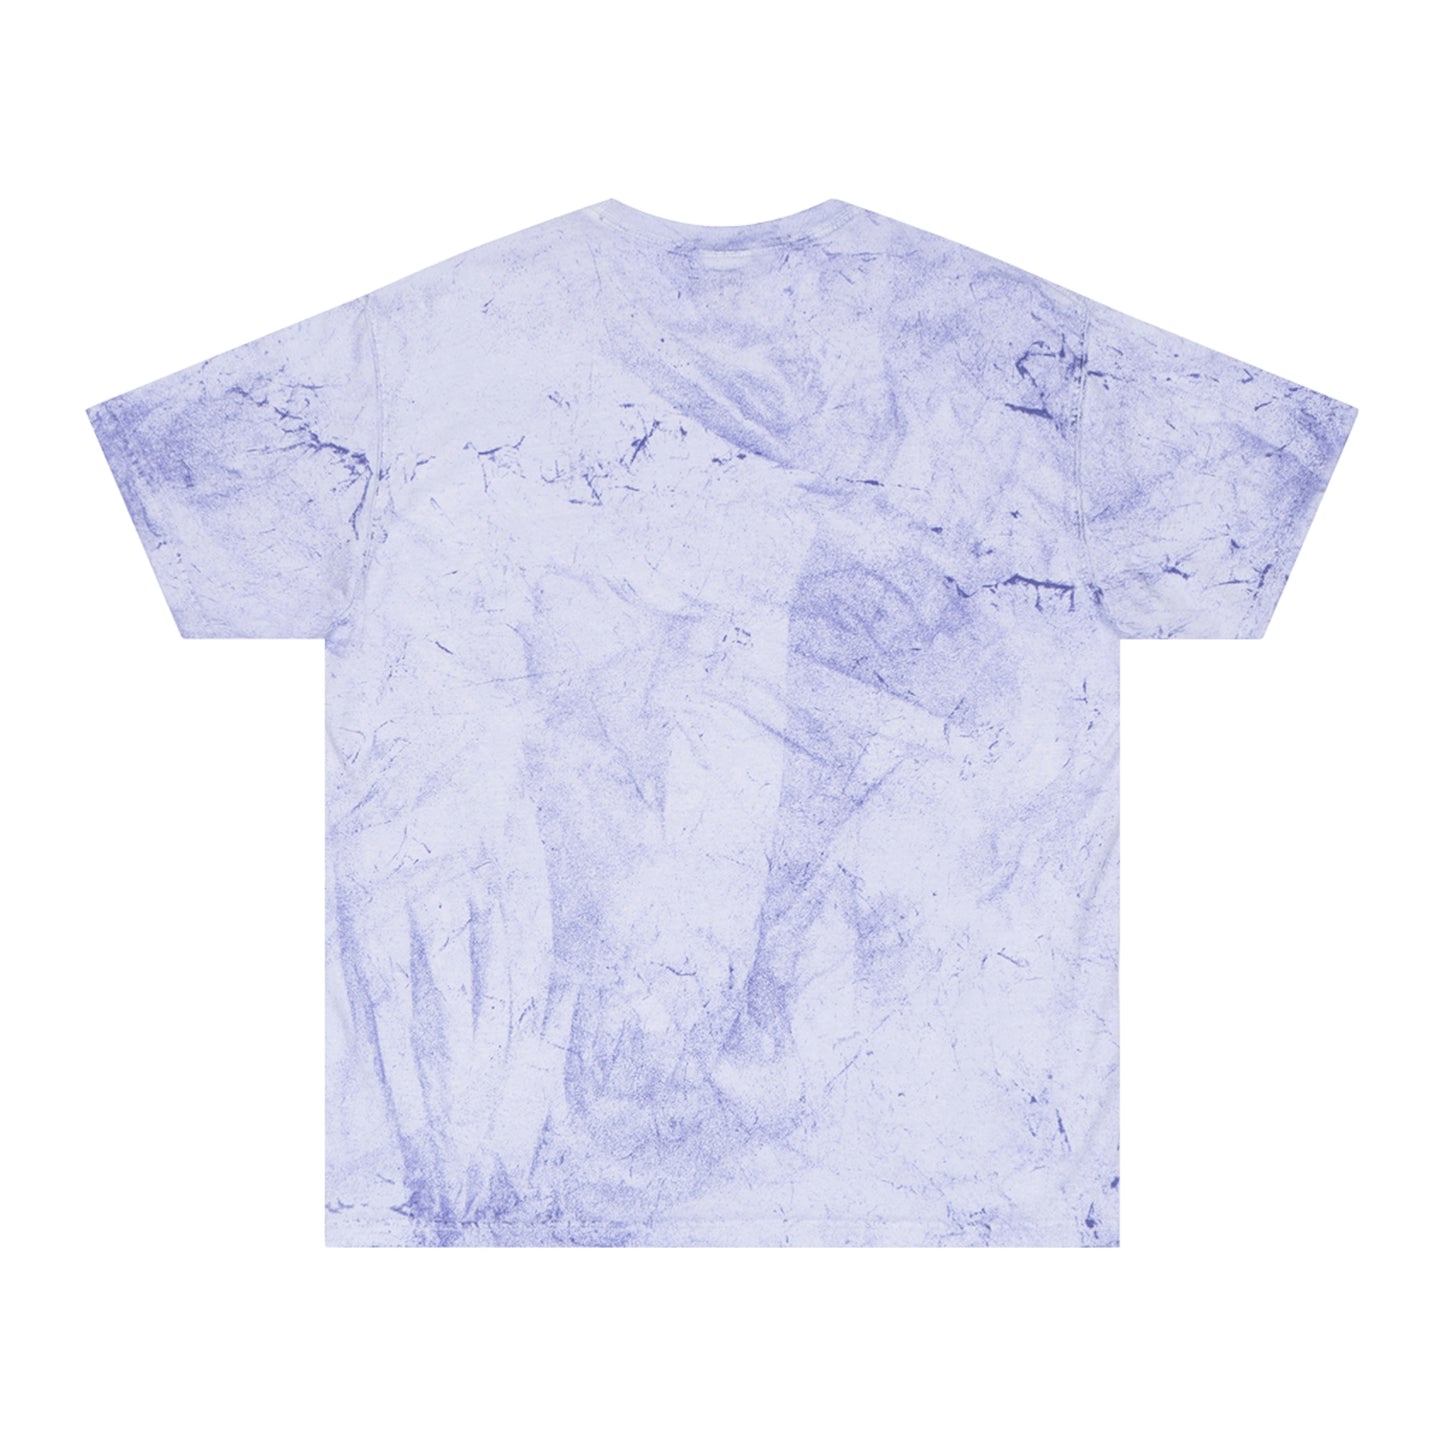 For men with a rebellious spirit, this tie die t-shirt has our #Rebel meme printed at the front of the tee! Show off your inner rebel and show it to the world!